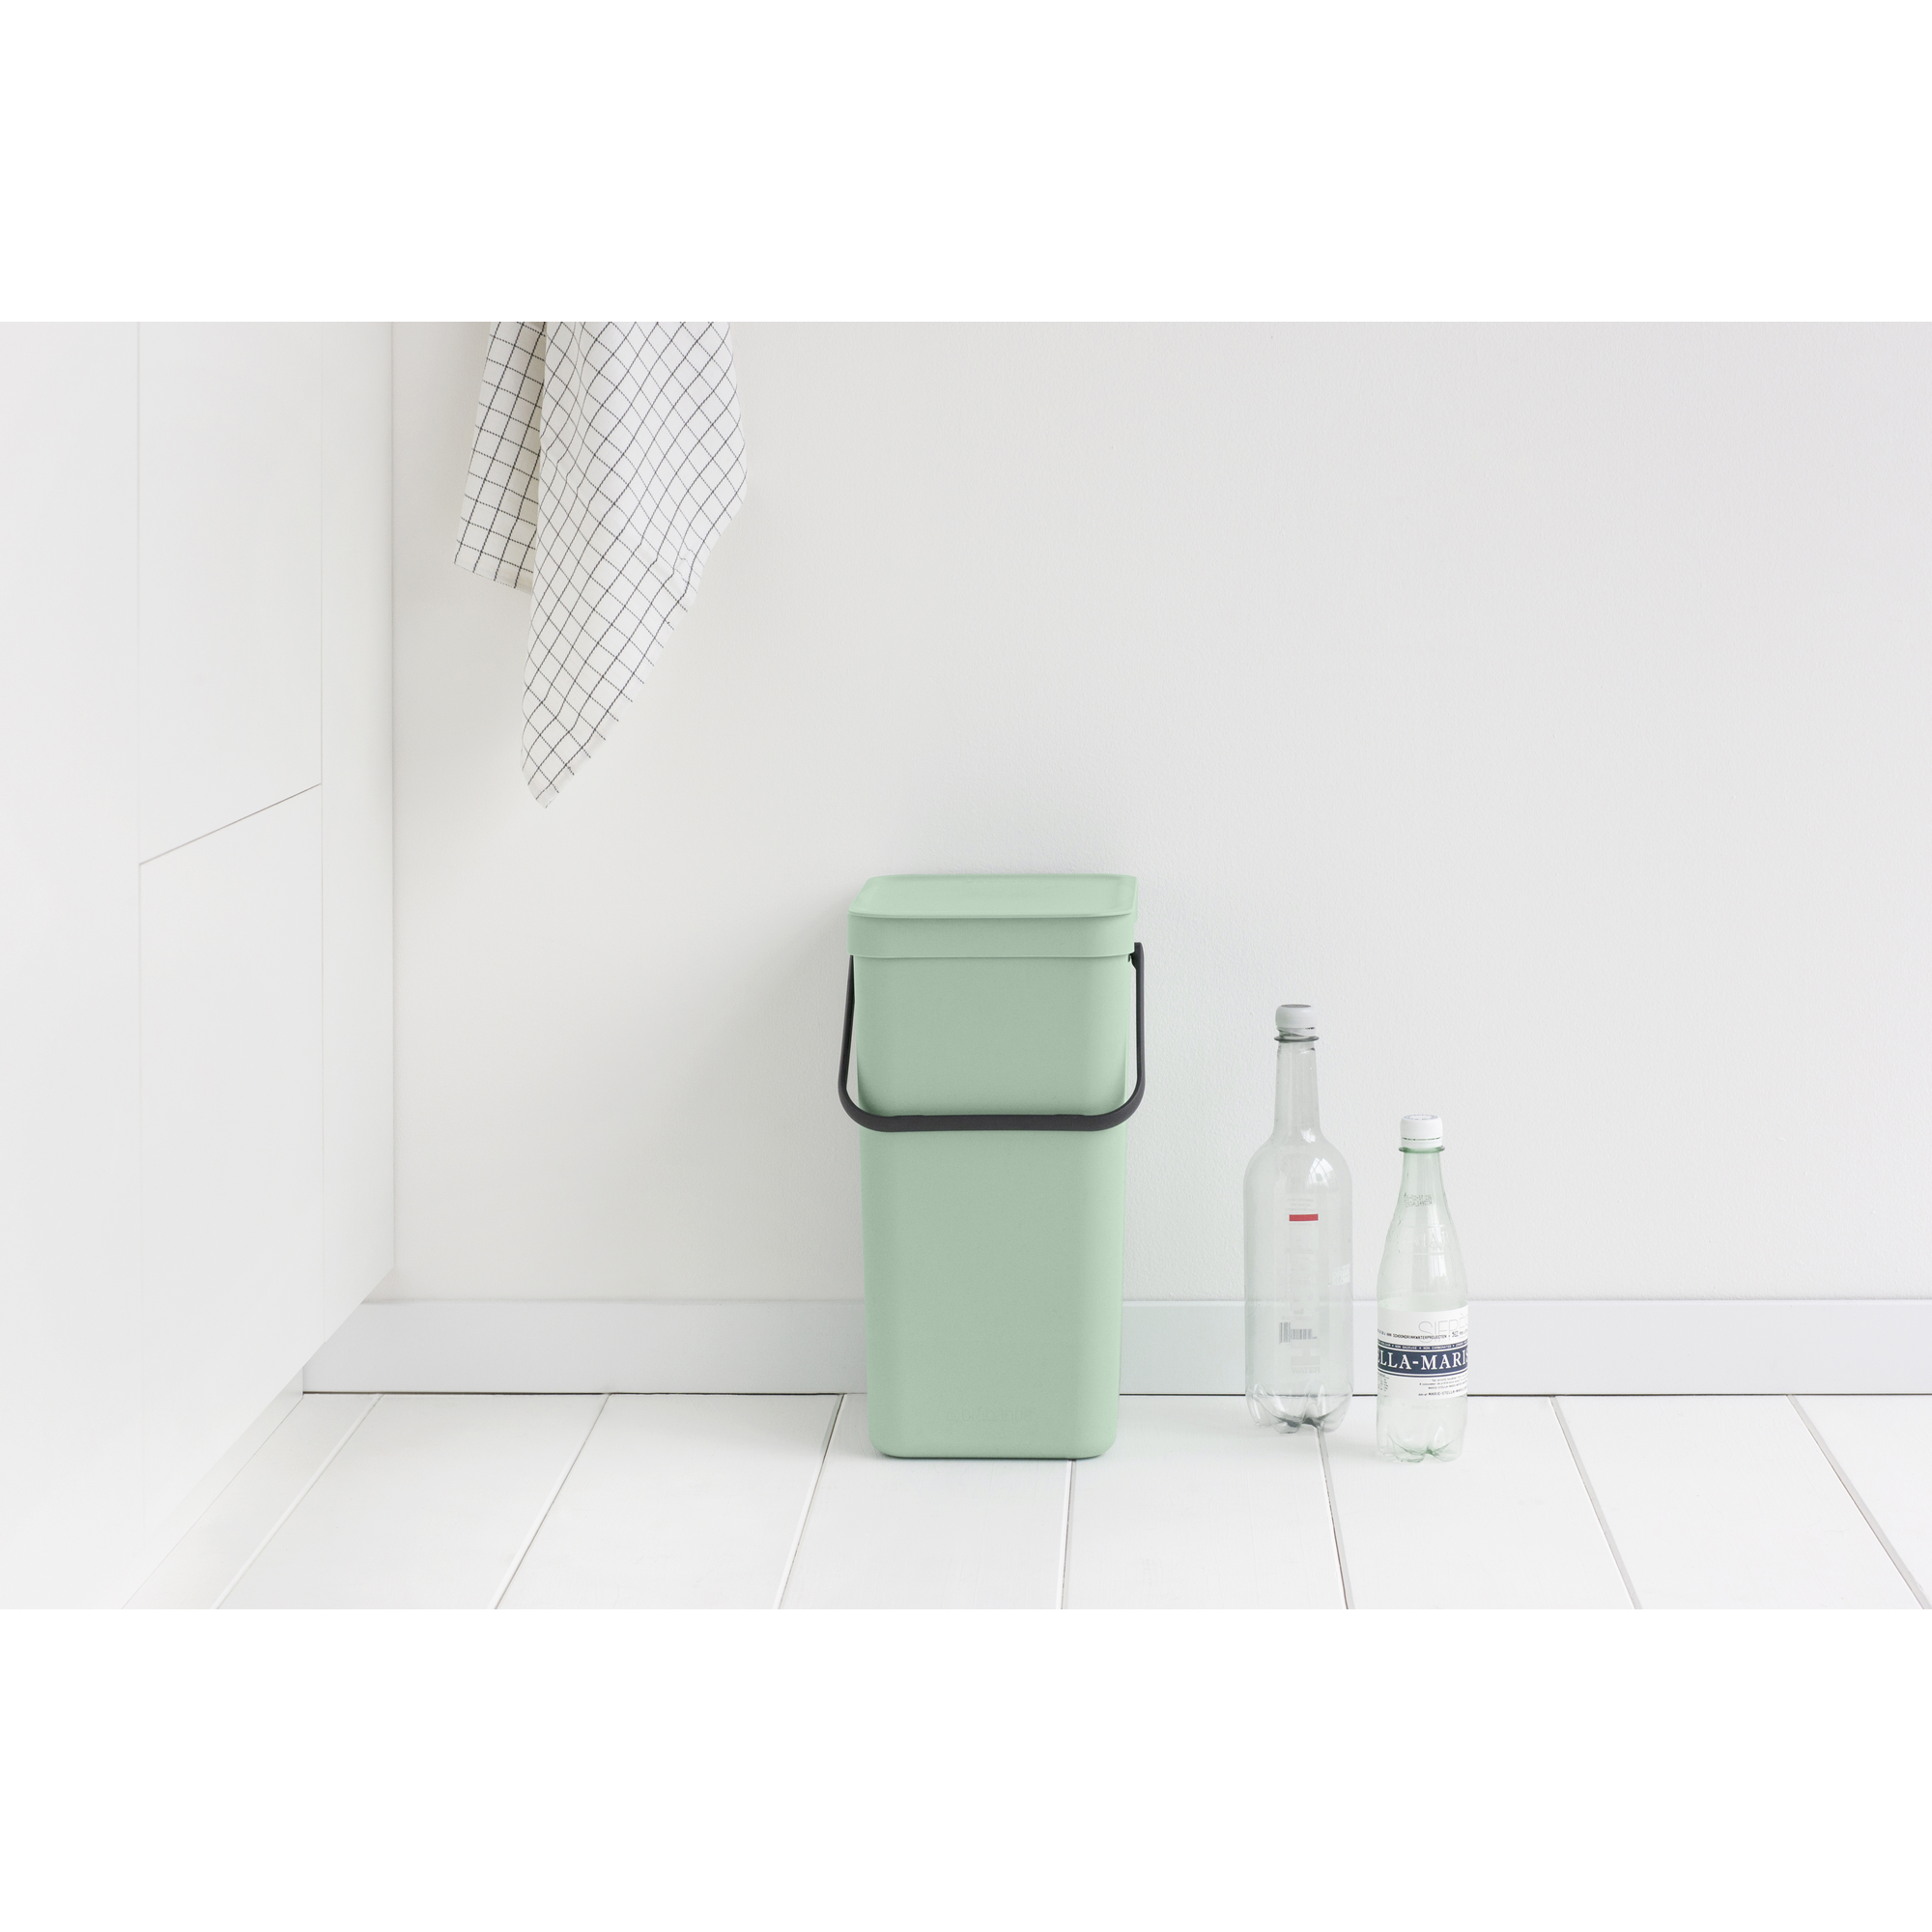 Abfallbehälter 'Sort & Go' 16 l jade green + product picture